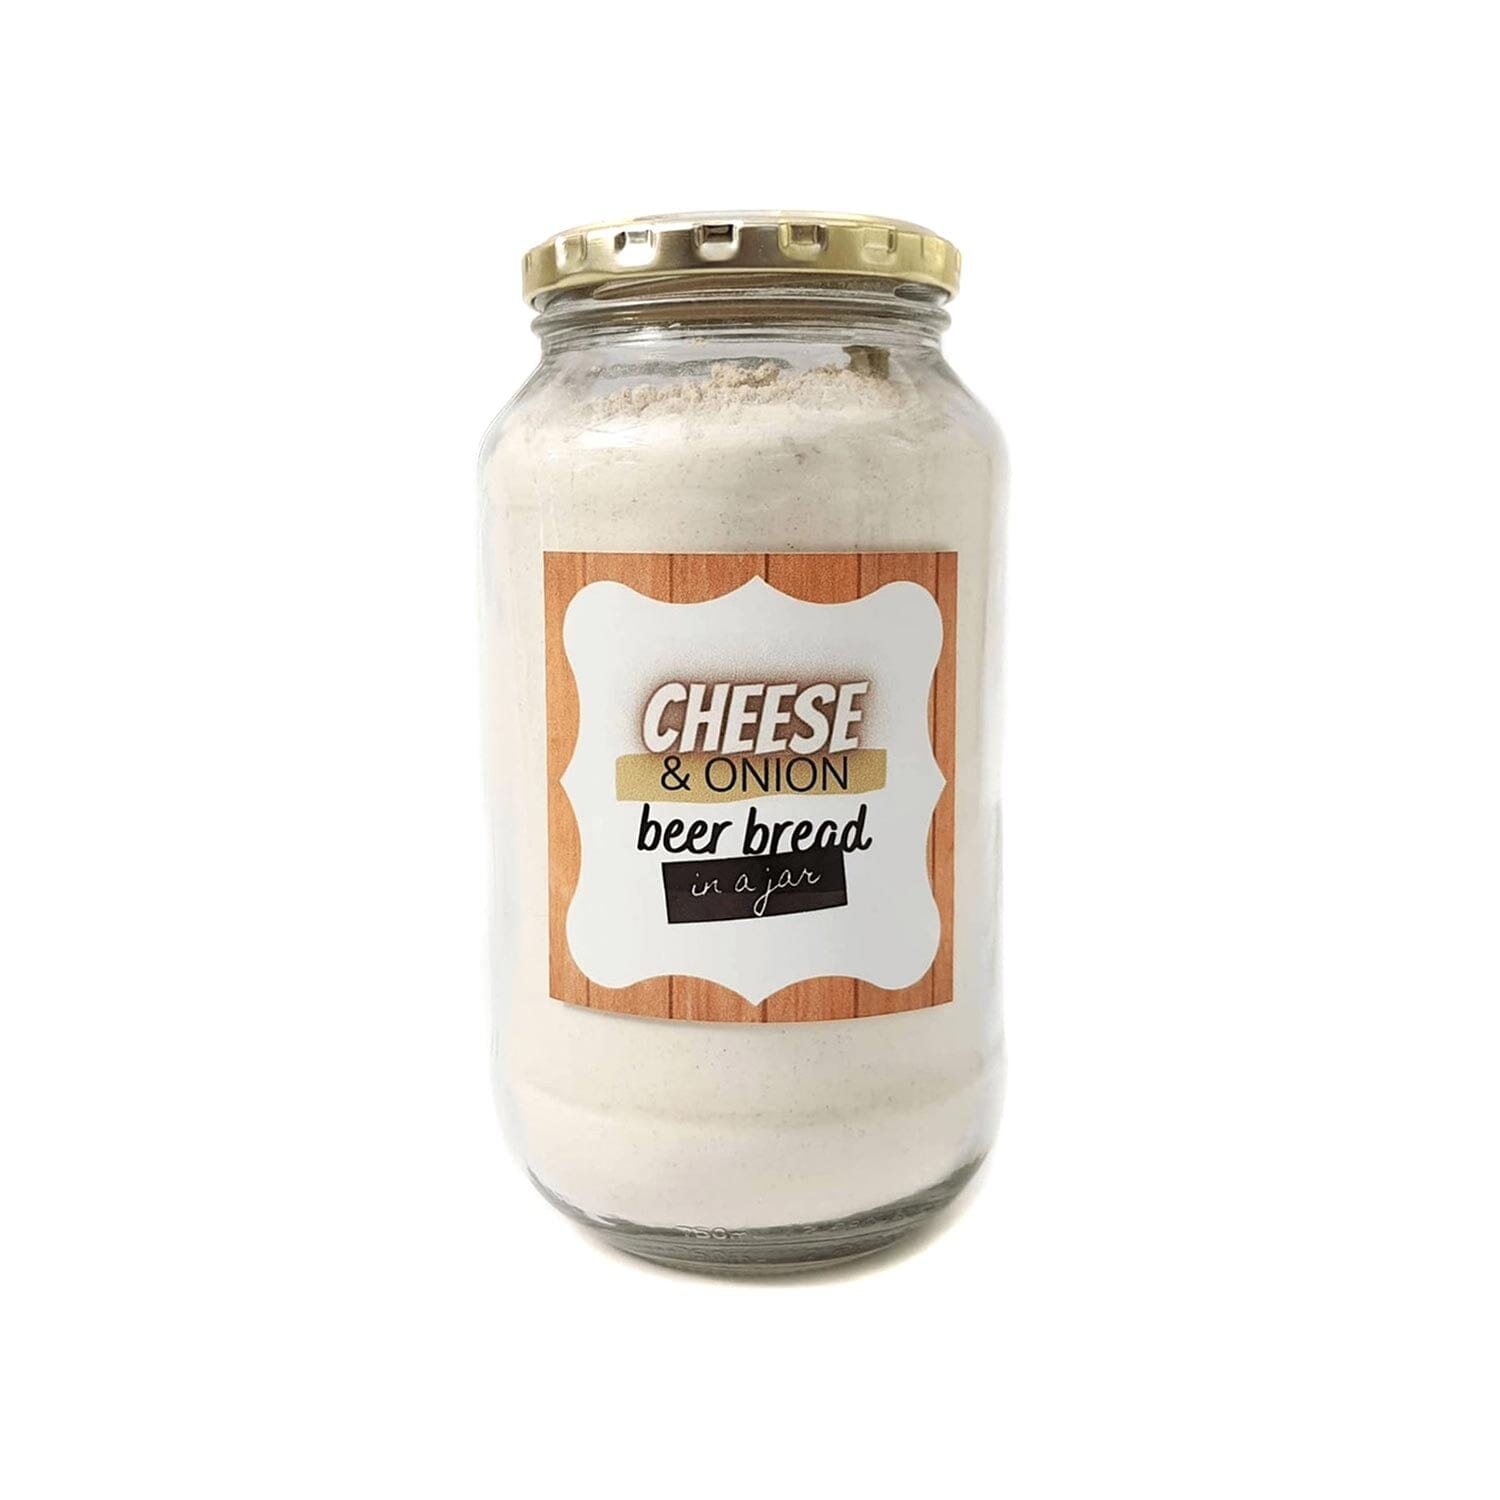 Gifts in a Jar Cheese & Onion Beer Bread Baking Mixes & Ingredients Gifts in a Jar 